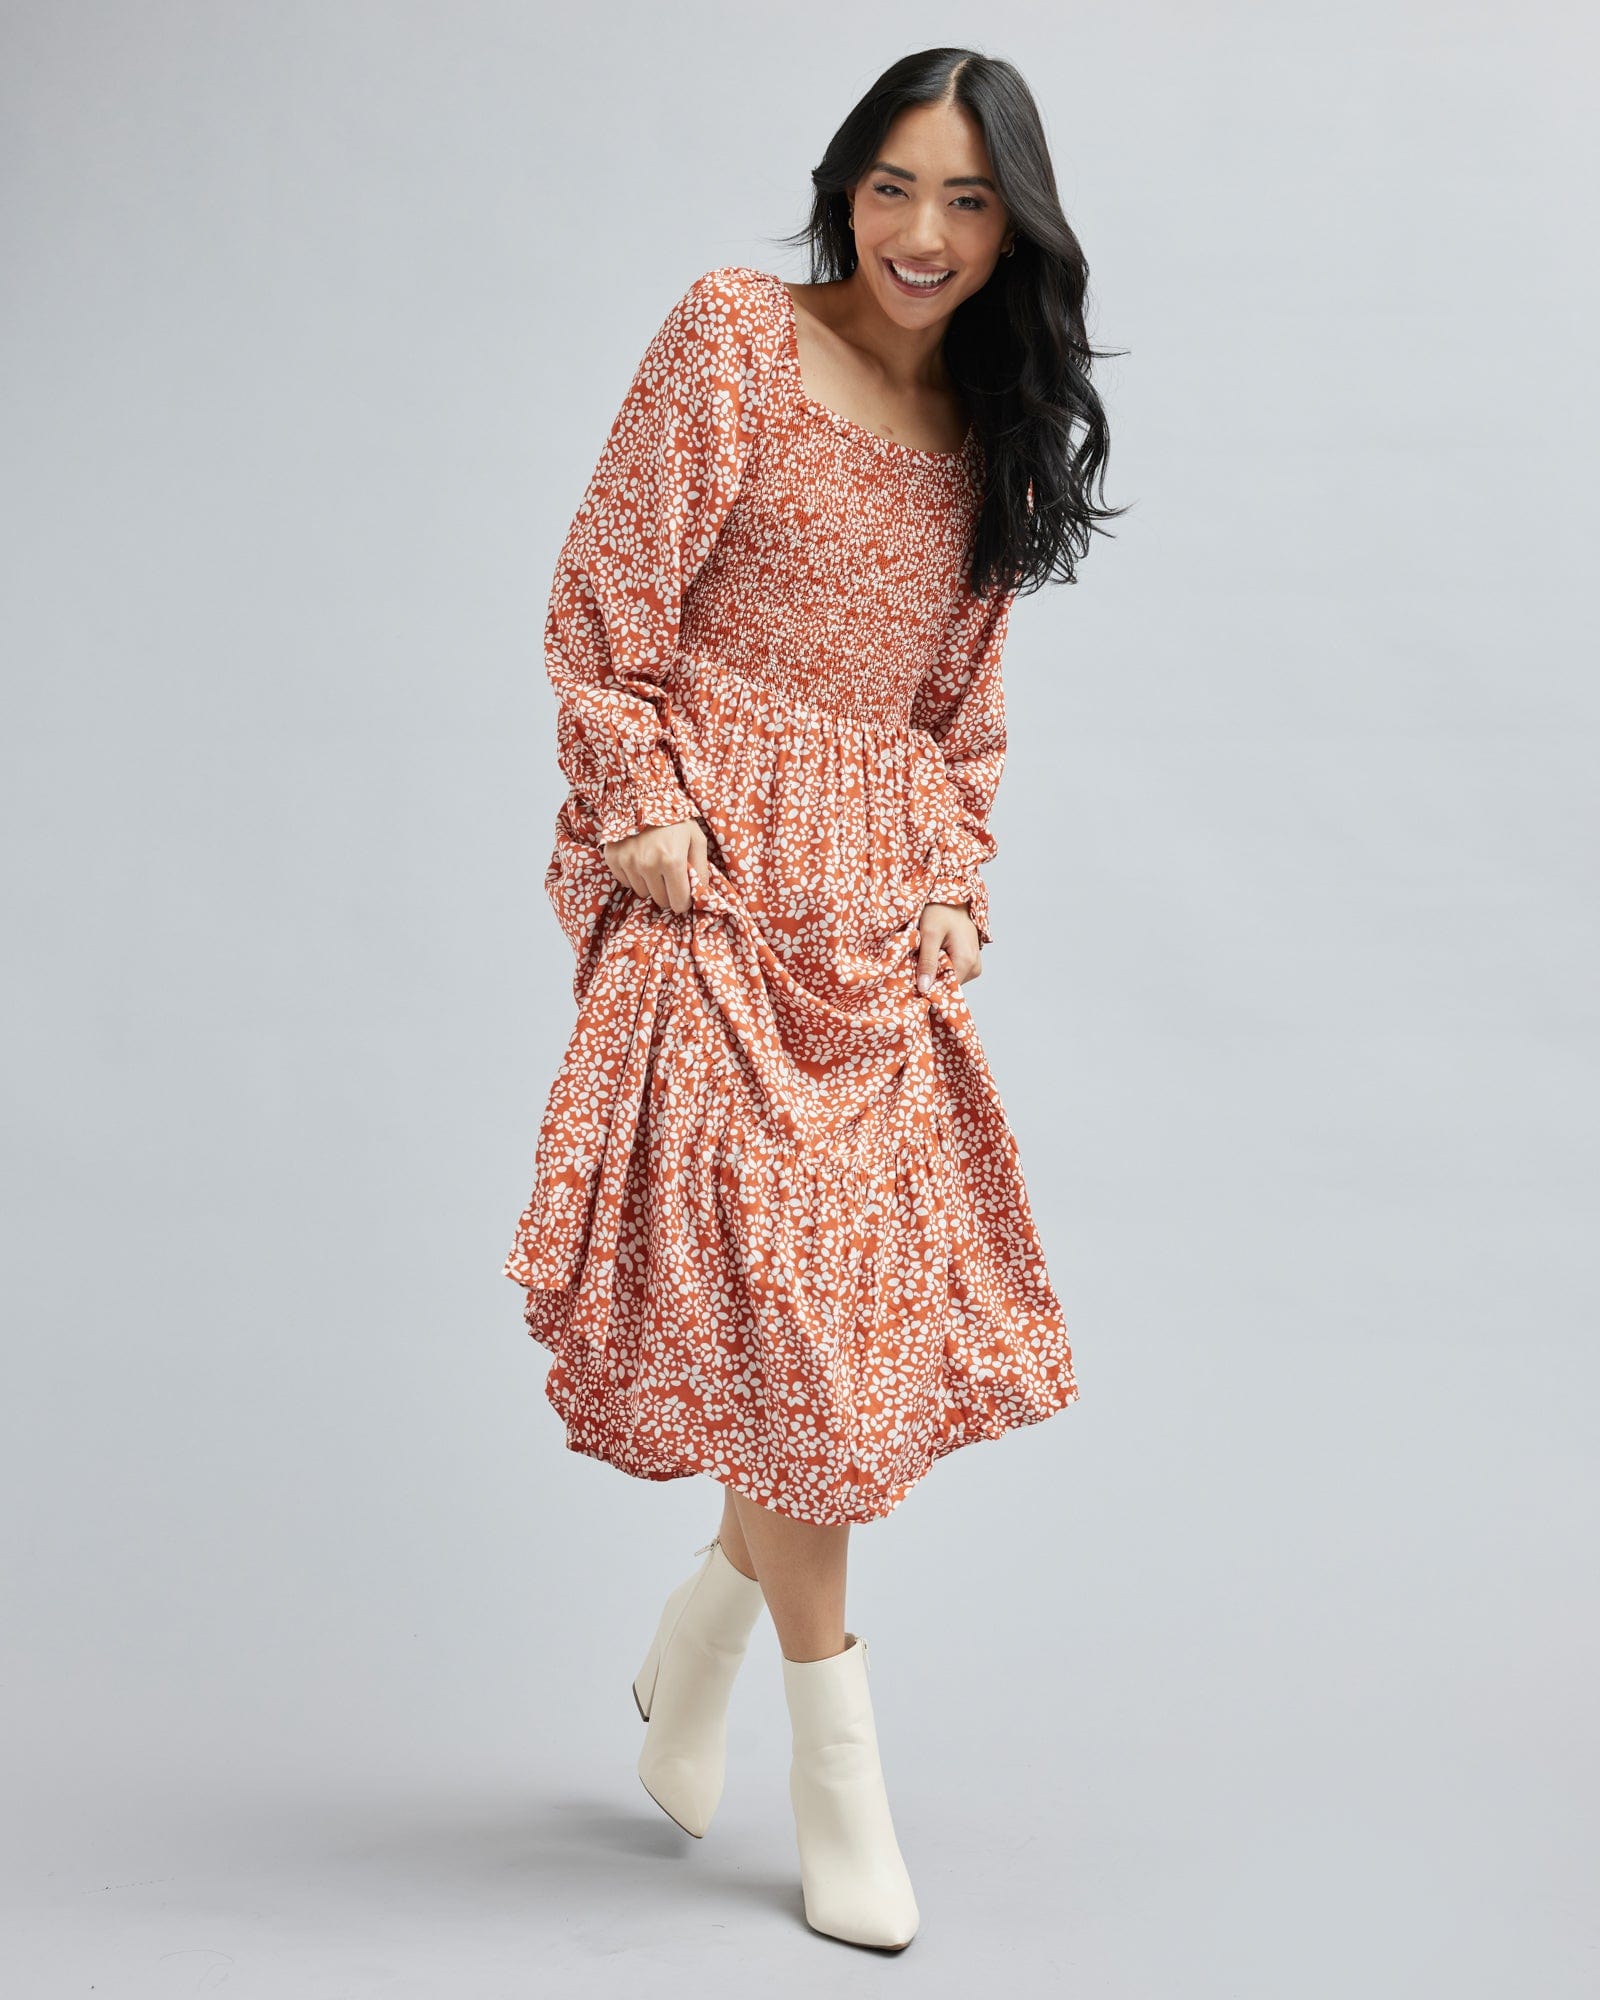 Woman in a long sleeve, midi-length, orange and white floral dress